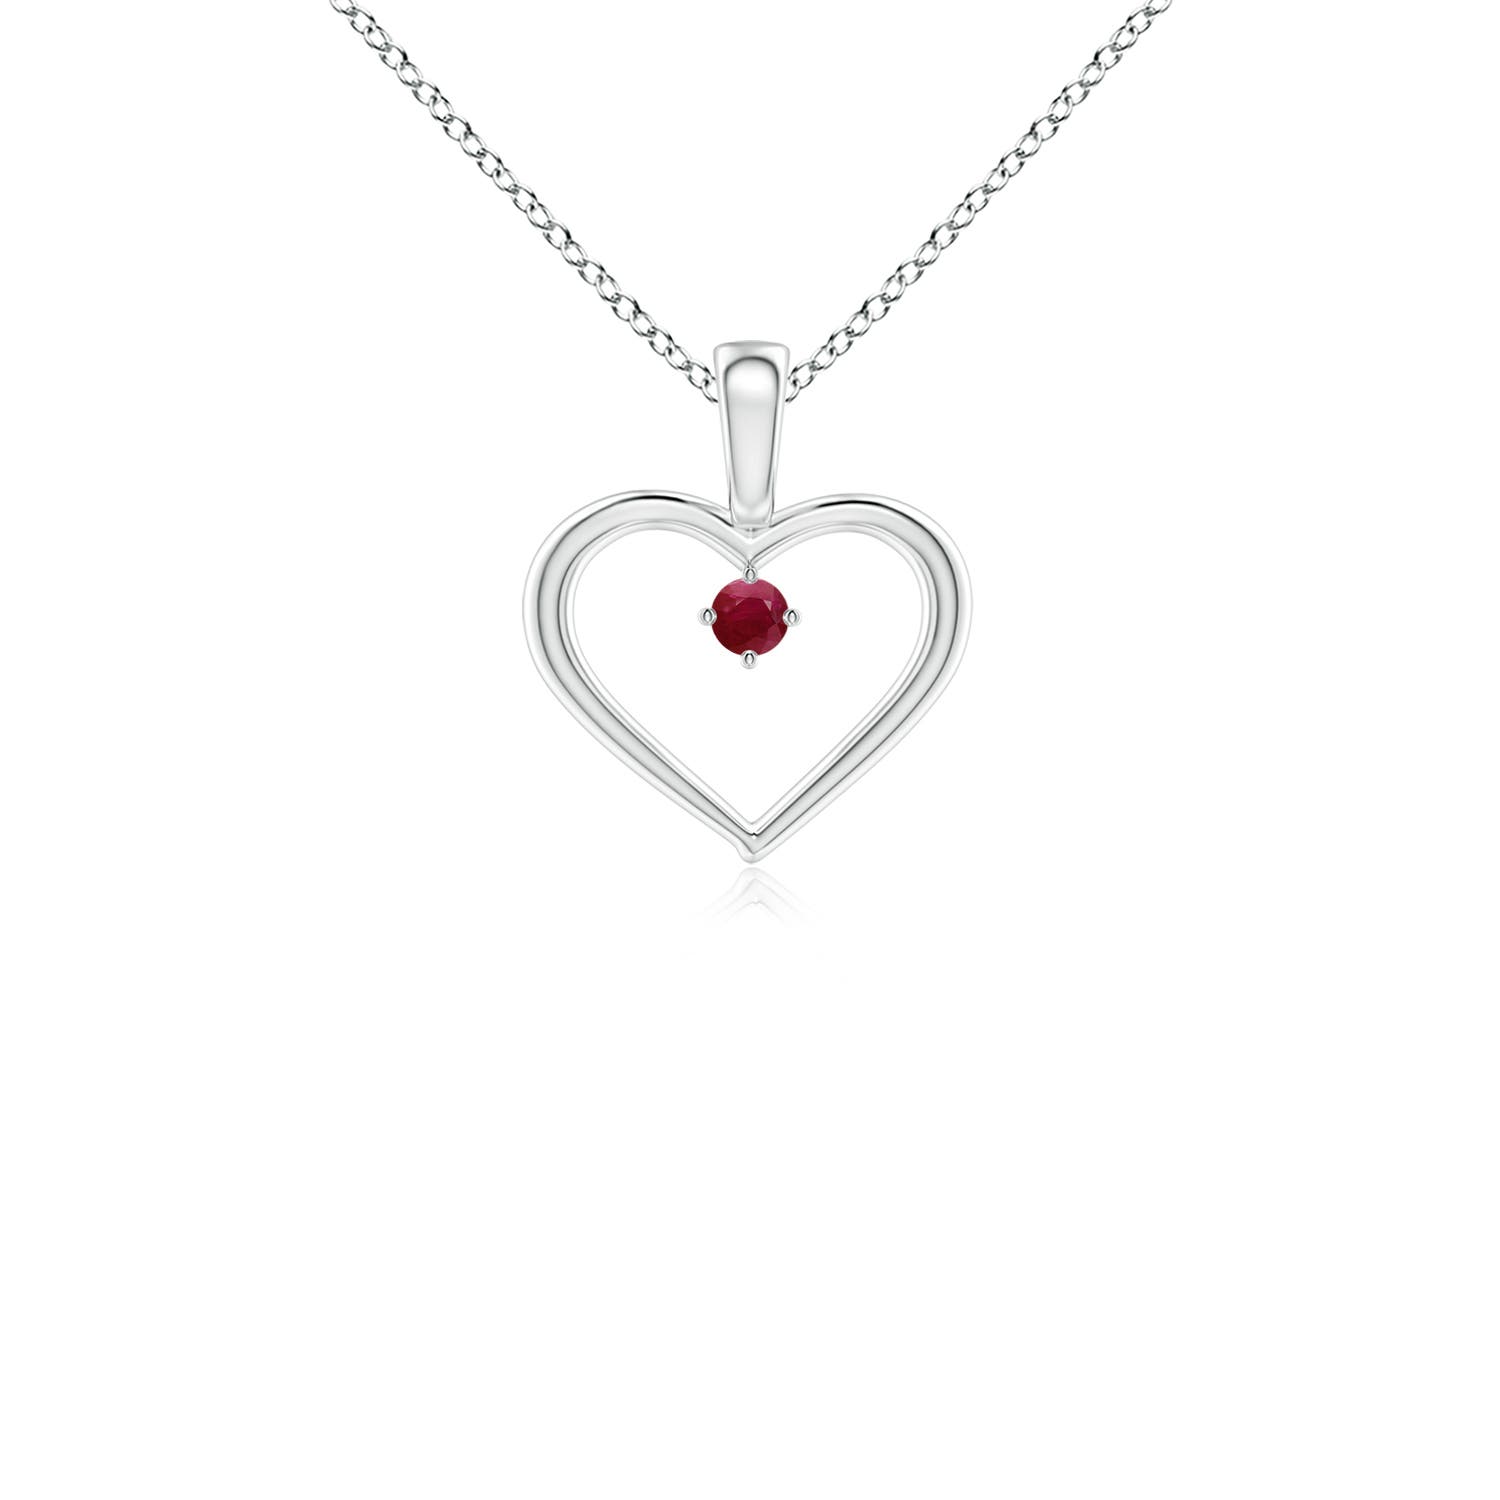 A - Ruby / 0.09 CT / 14 KT White Gold